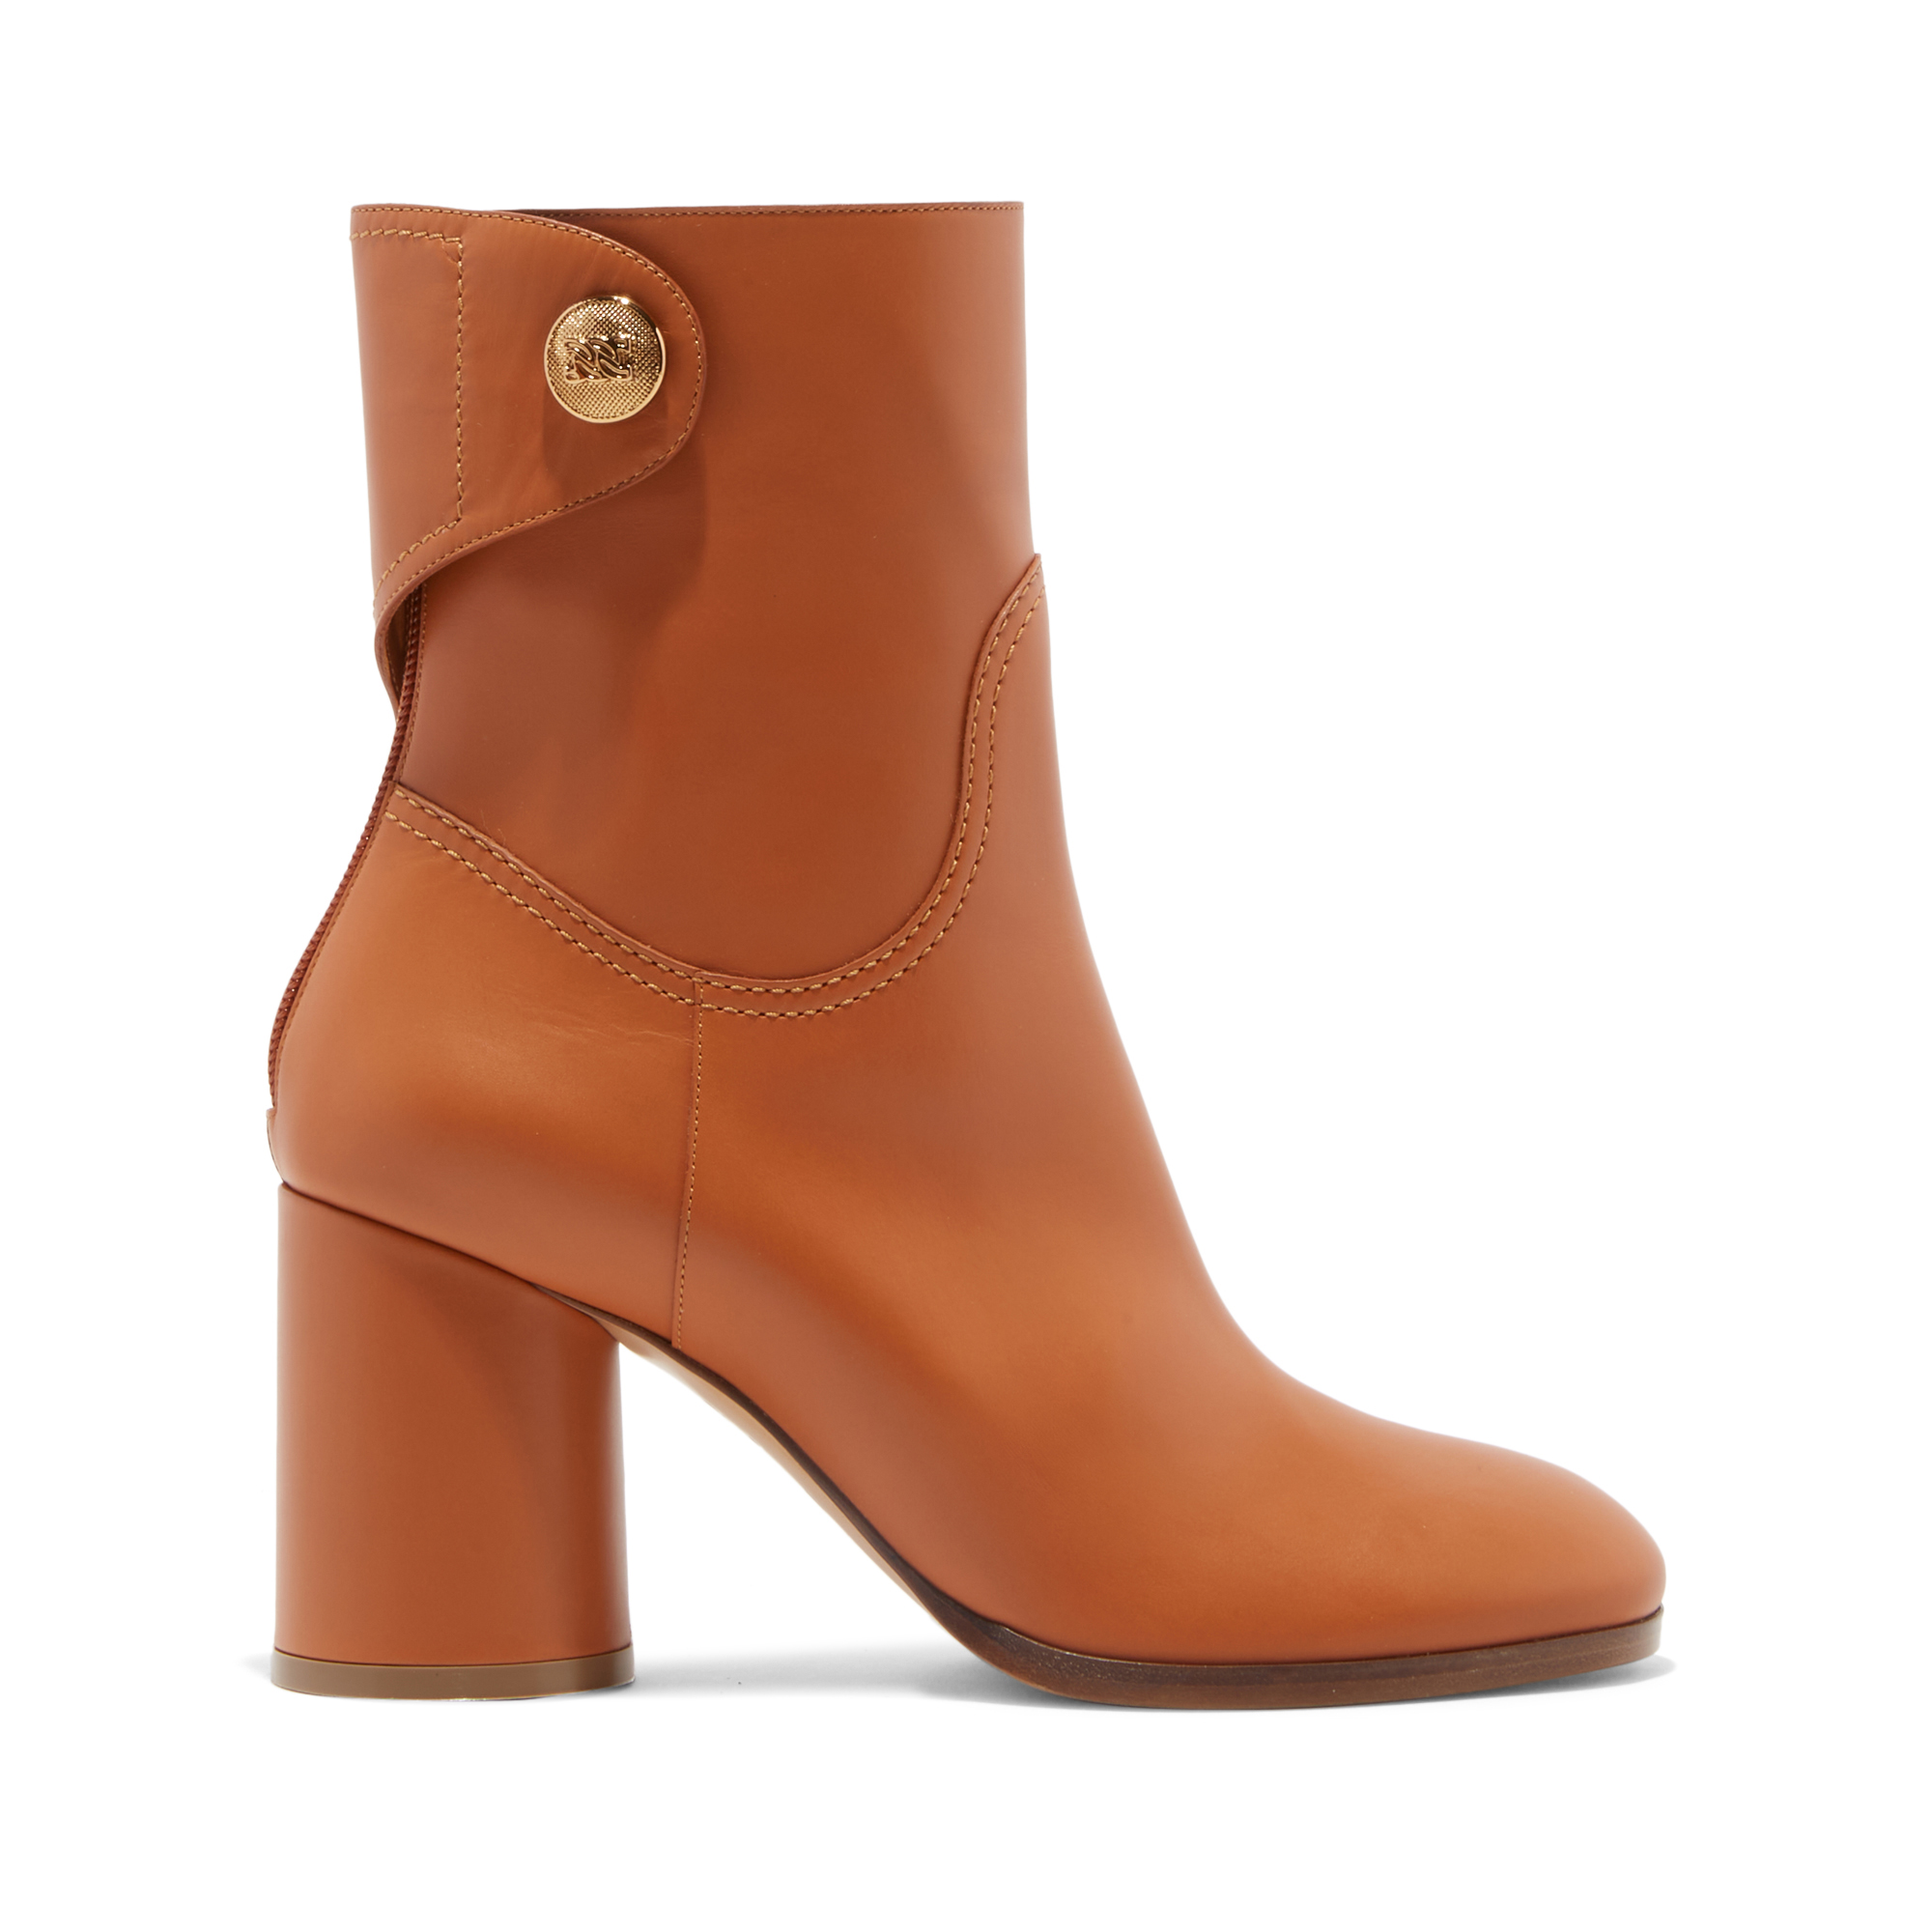 CASADEI CASADEI CLEO LEATHER - WOMAN ANKLE BOOTS WALNUT 39